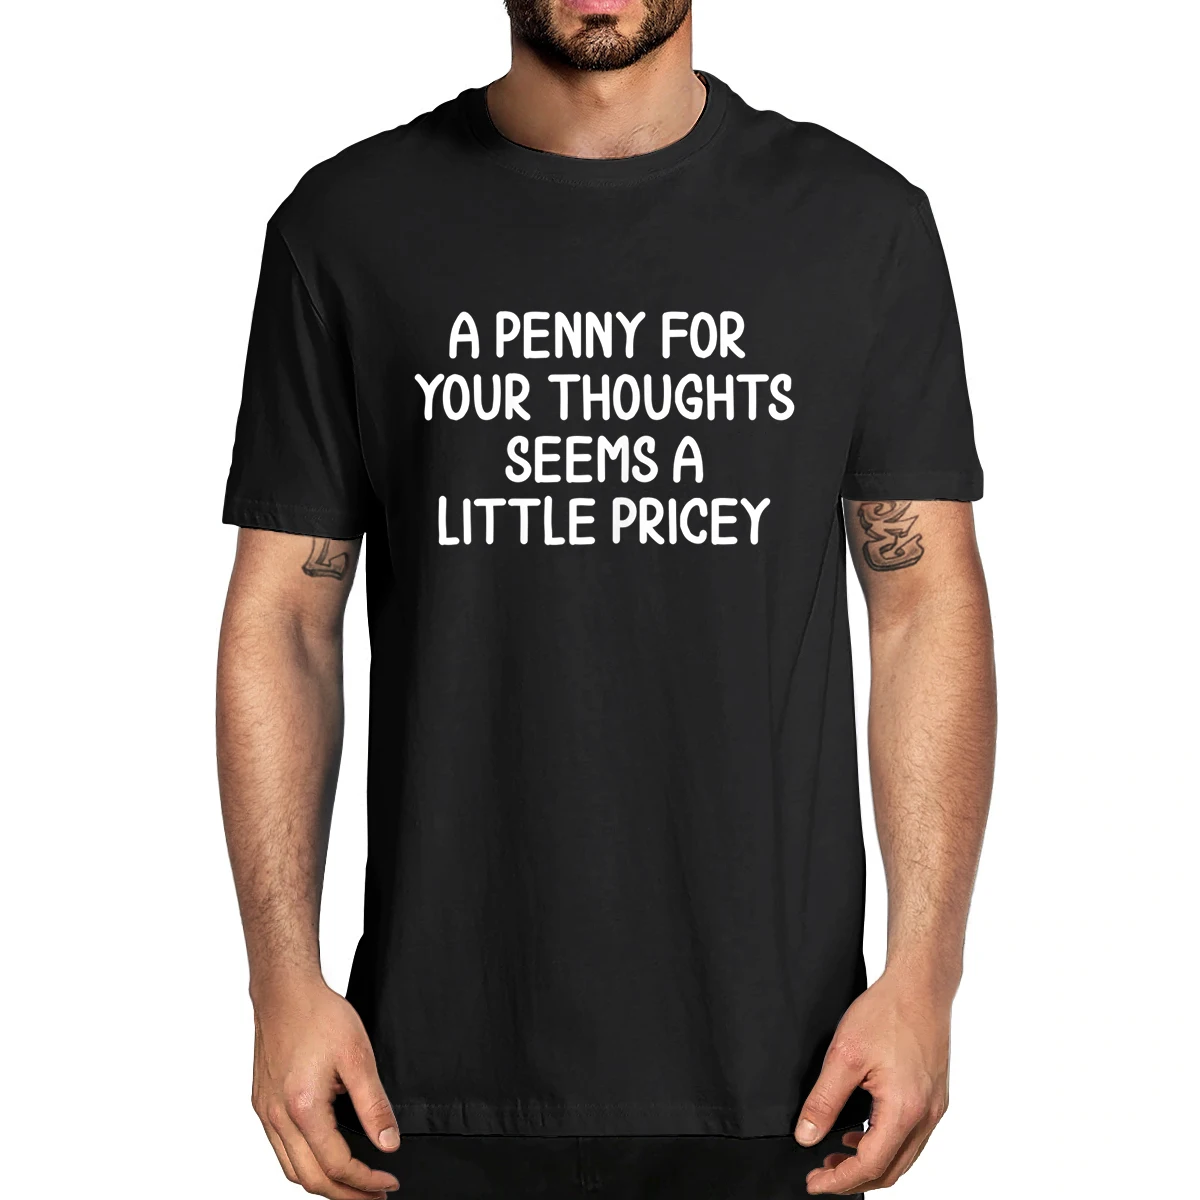 

XS-5XL 100% Cotton Funny A Penny For Your Thoughts Seems A Little Pricey T-shirt Joke Sarcastic Men's Casual Novelty Soft Tee